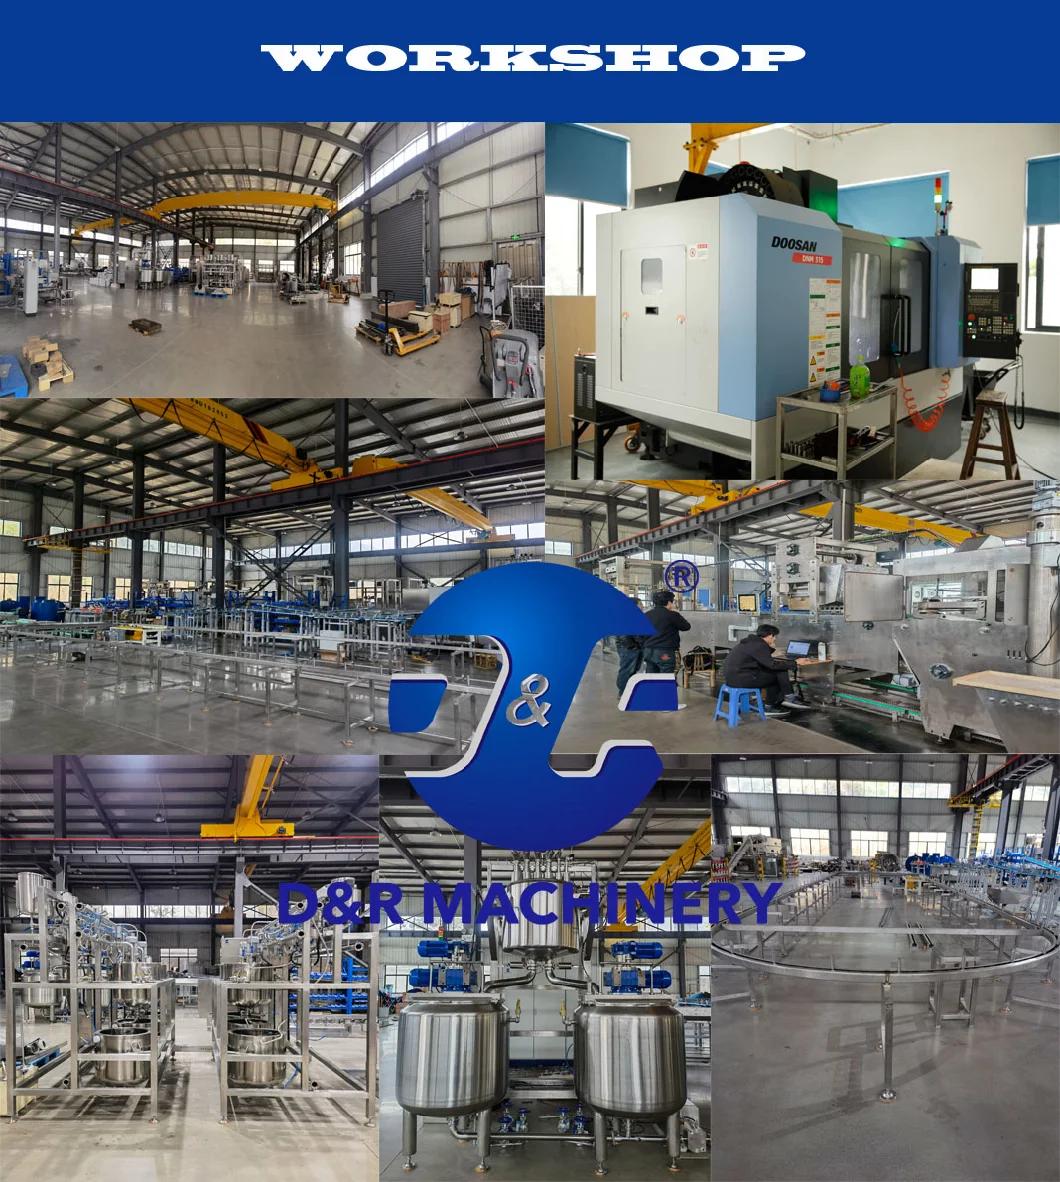 Depositor Moulding Chocolate Manufacturing Equipment Chocolate Making Equipment for Sale